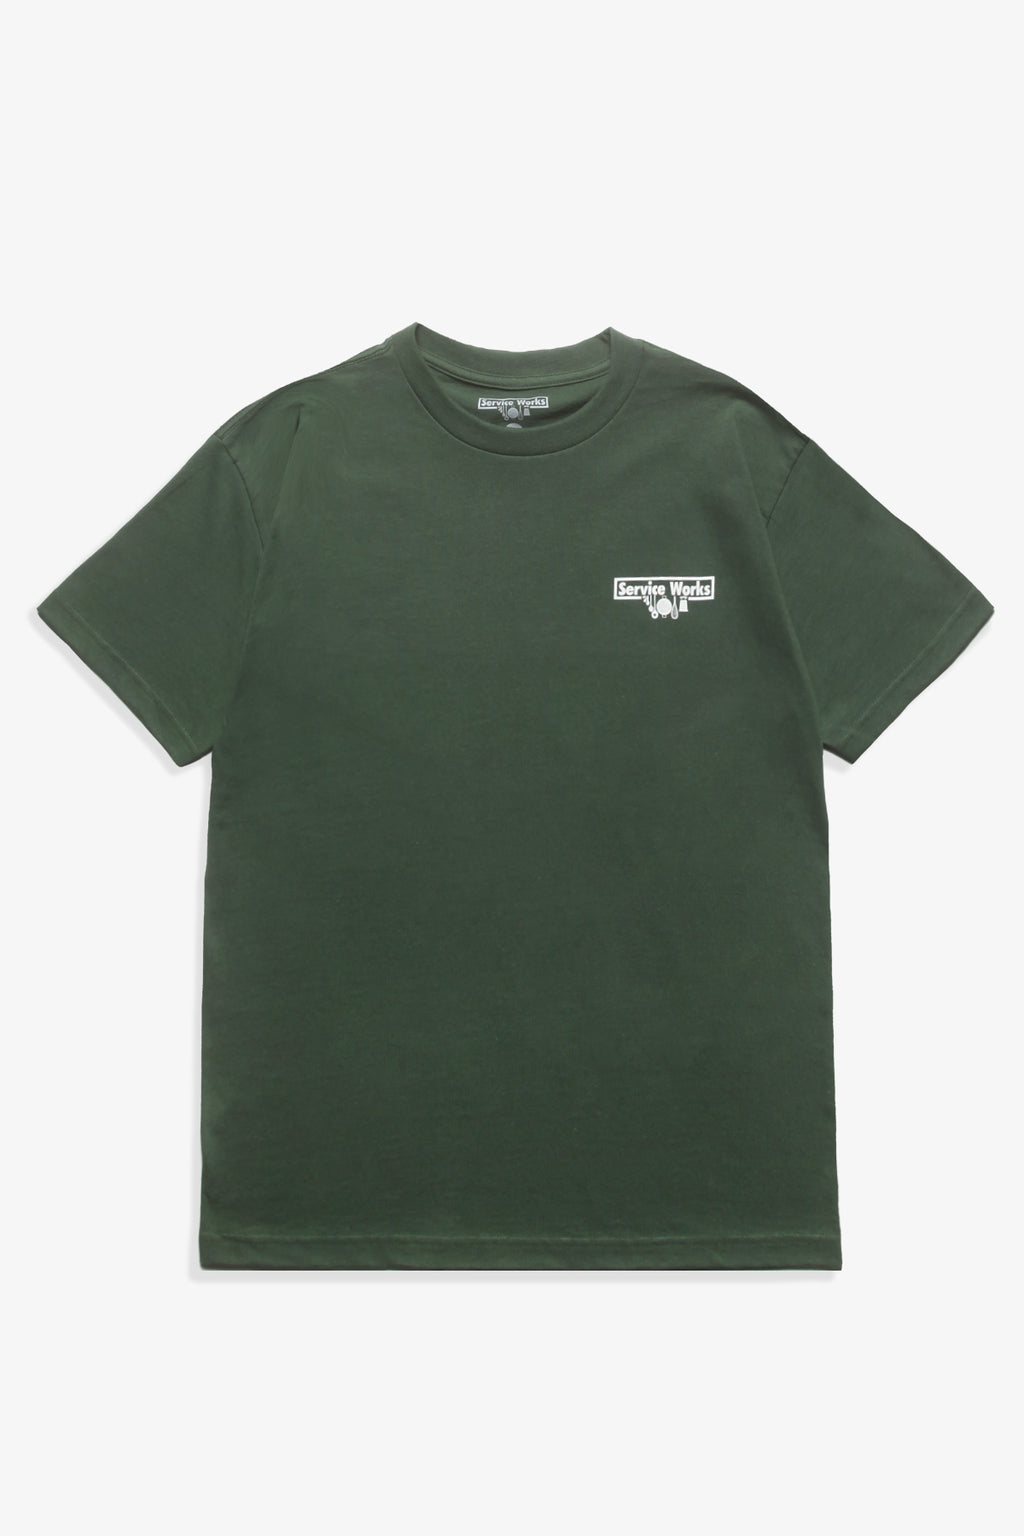 Service Works - Logo Tee - Forest Green